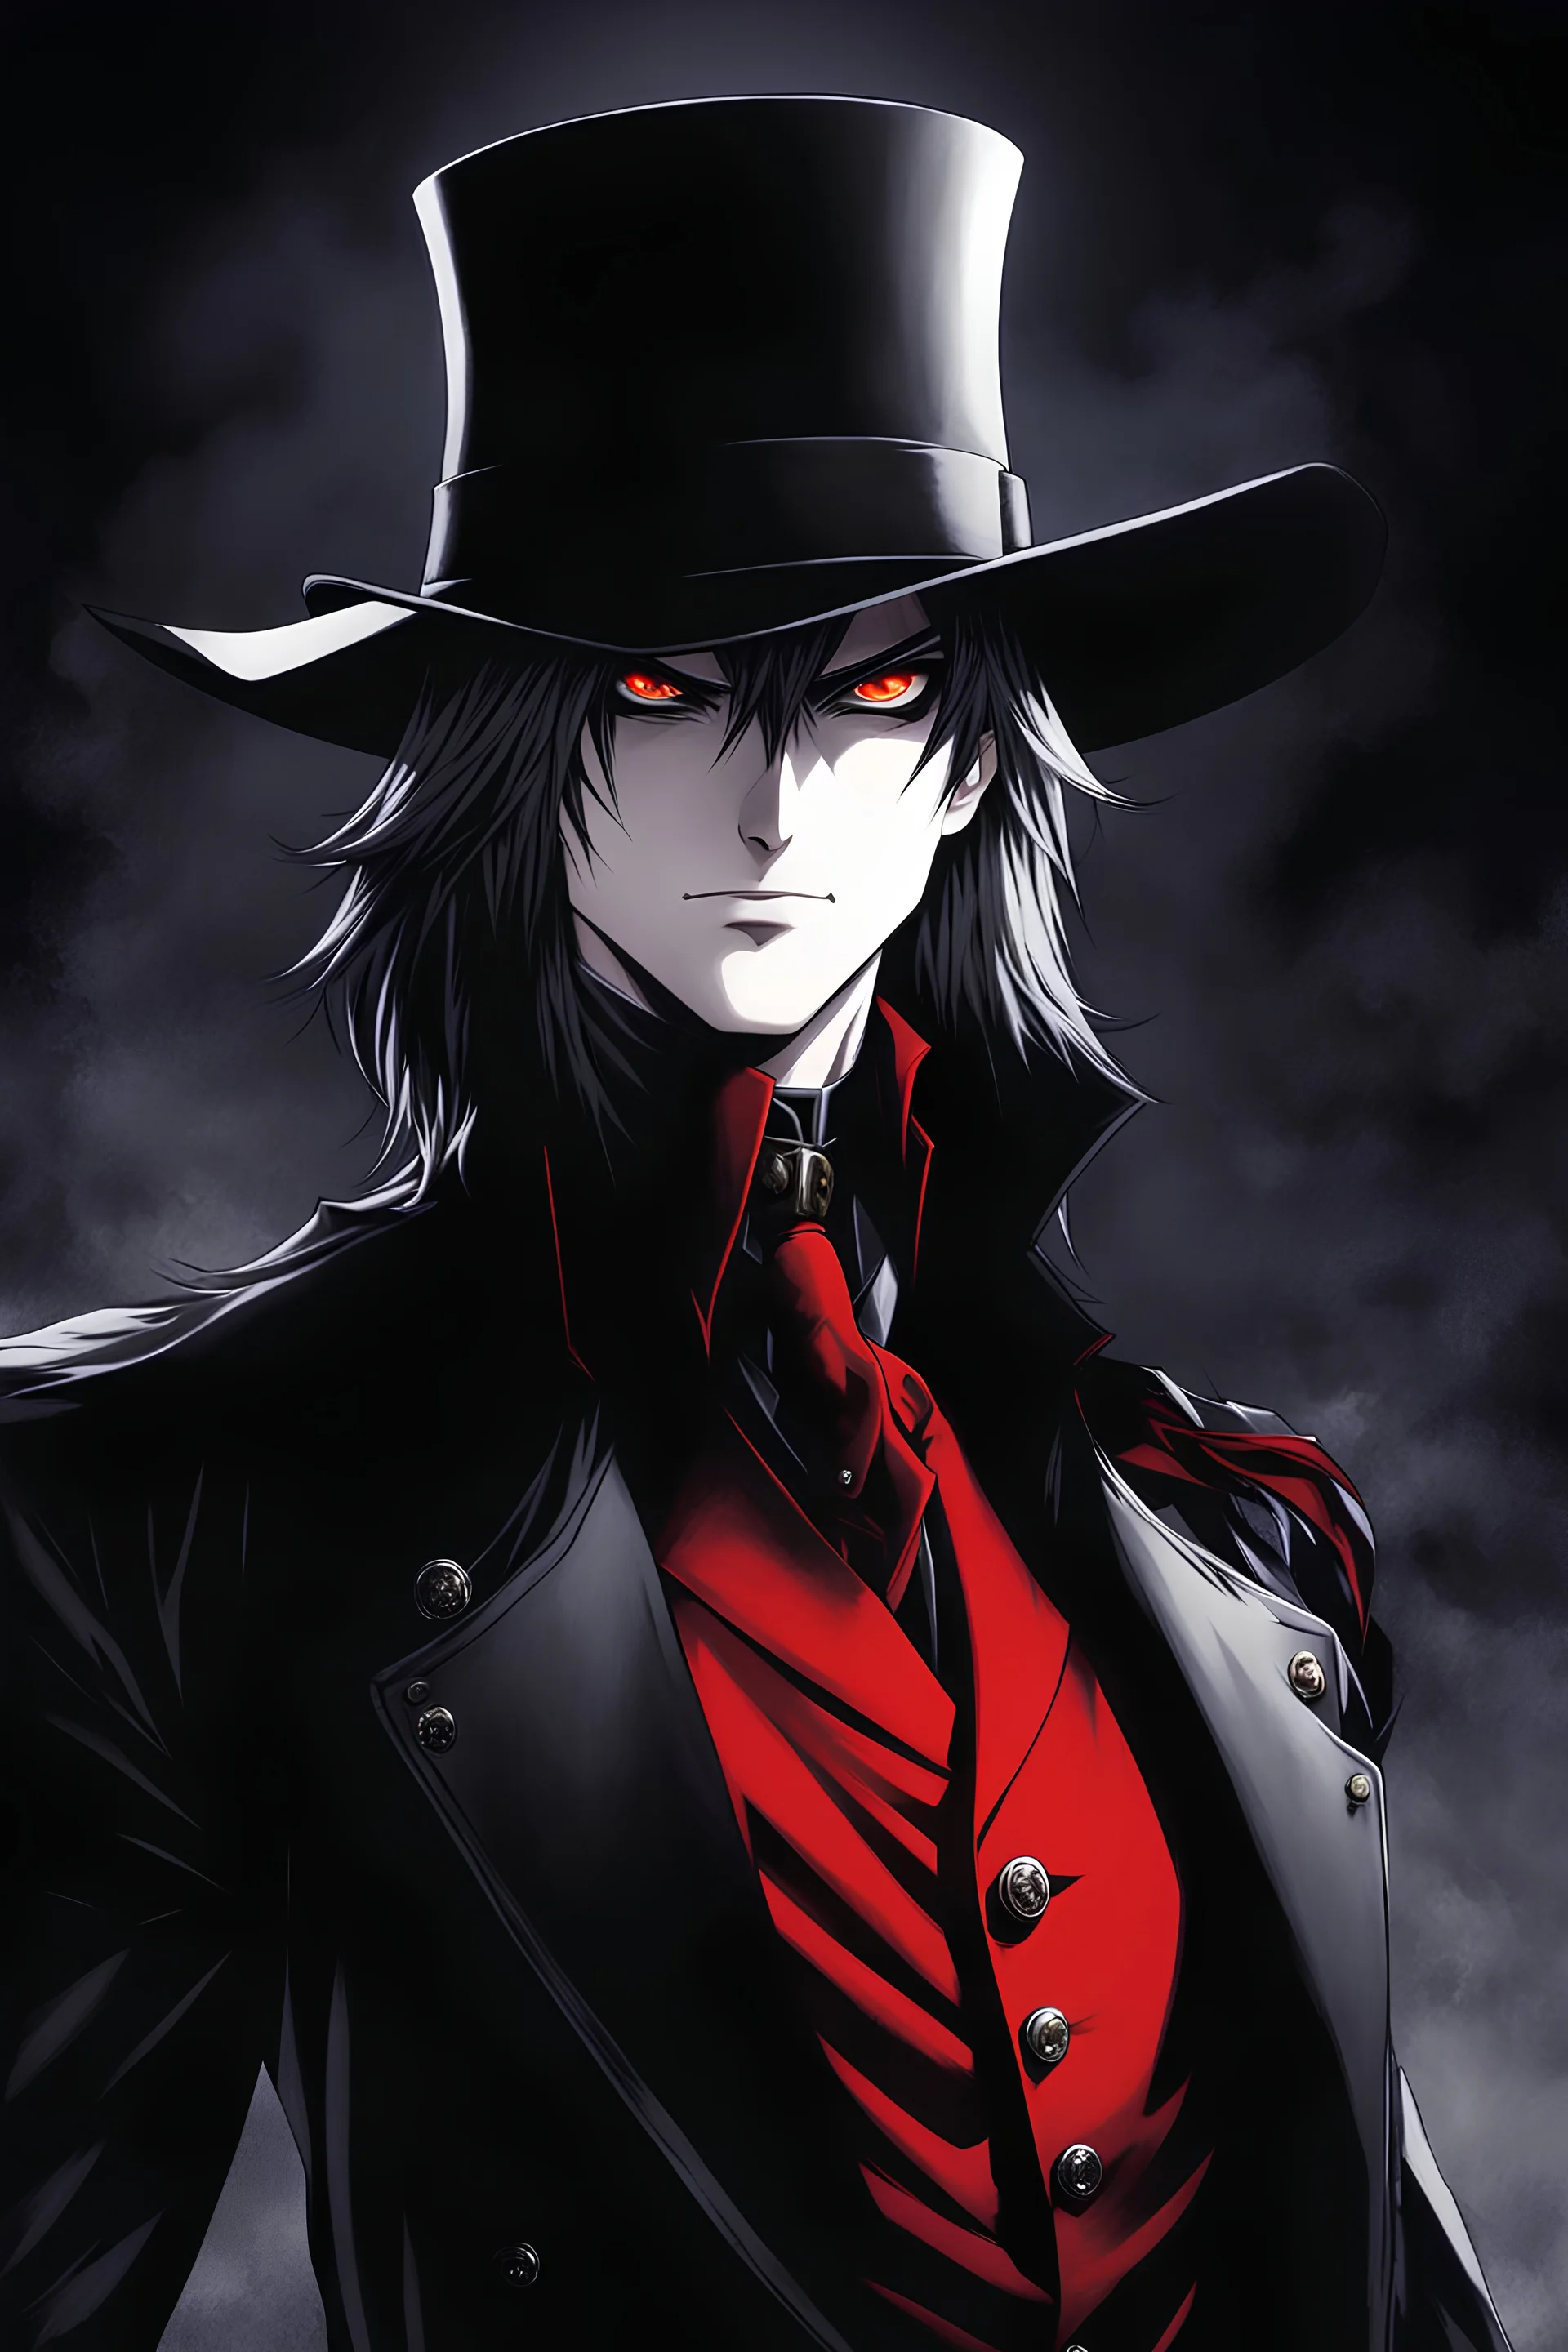 Alucard from Hellsing illustrated by THORES Shibamoto